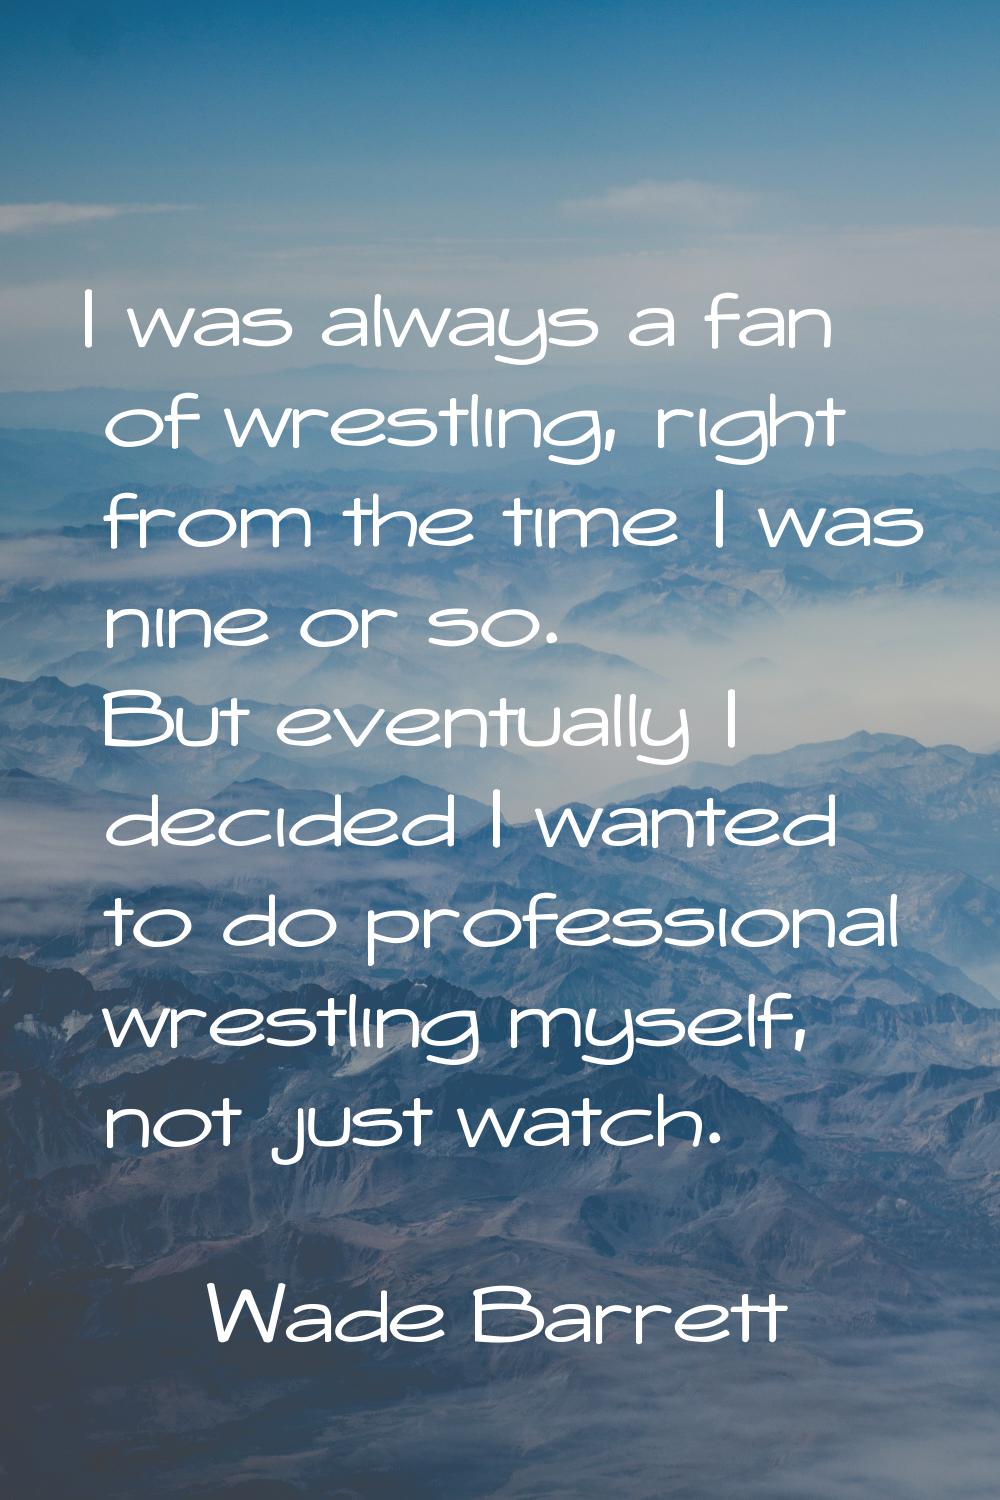 I was always a fan of wrestling, right from the time I was nine or so. But eventually I decided I w